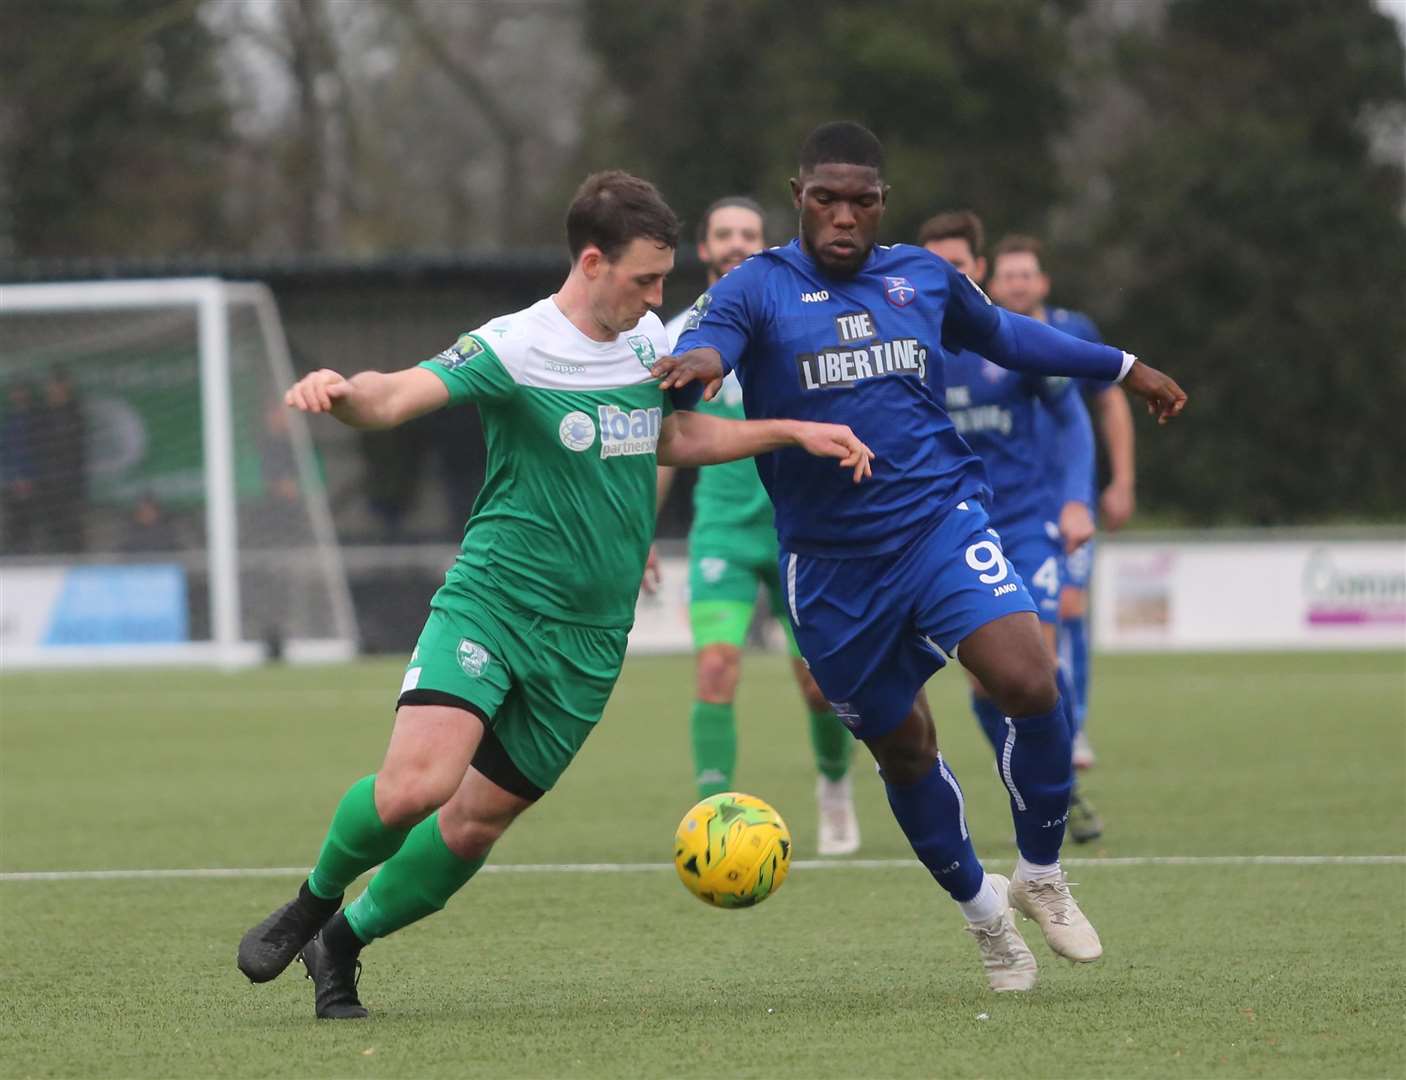 Margate's David Smith in action against Leatherhead (6794284)